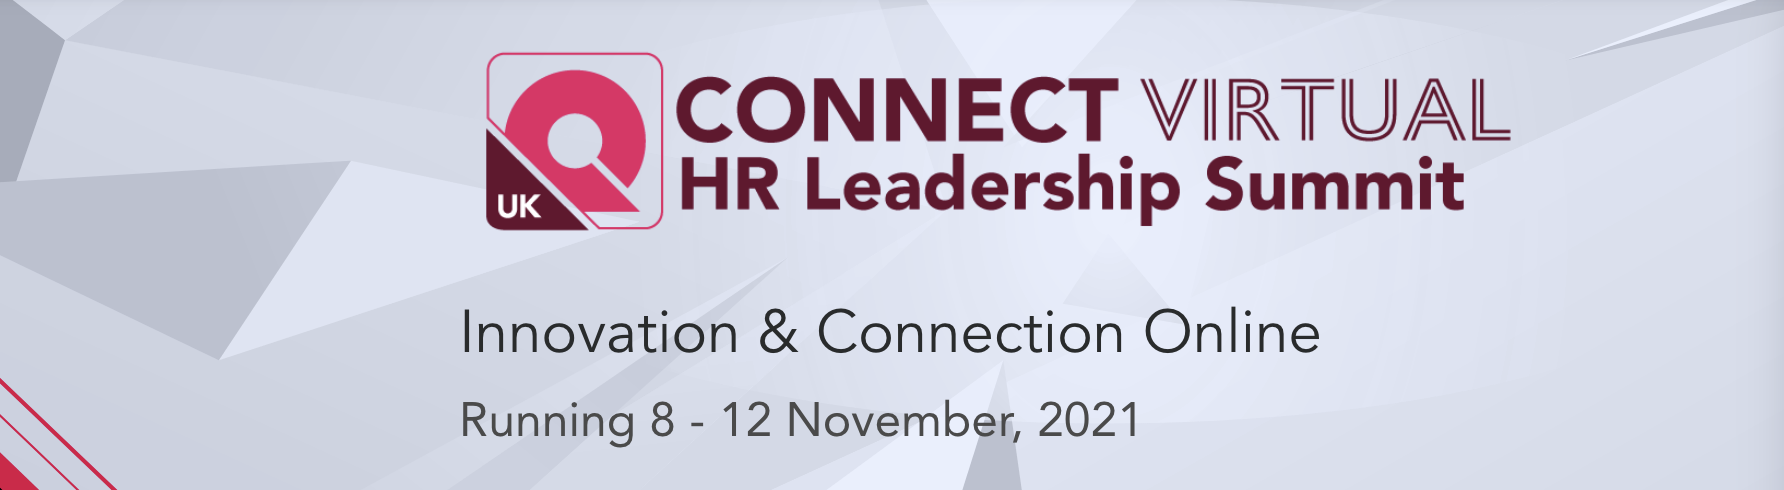 connect HR event 2021